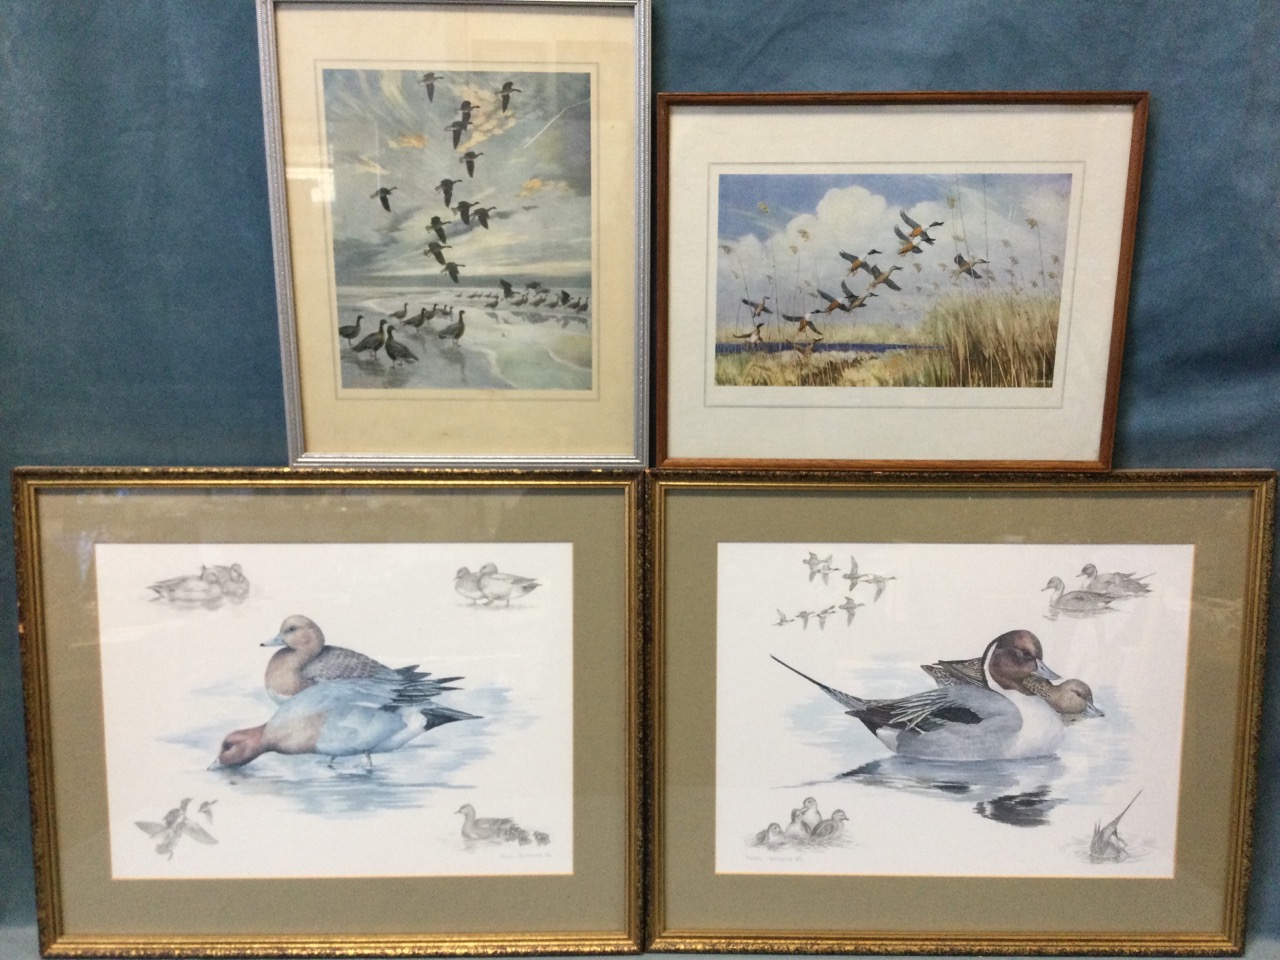 Two framed Peter Scott prints - Taking to Wing and Pinkfoot Coming Home to Roost; and a pair of